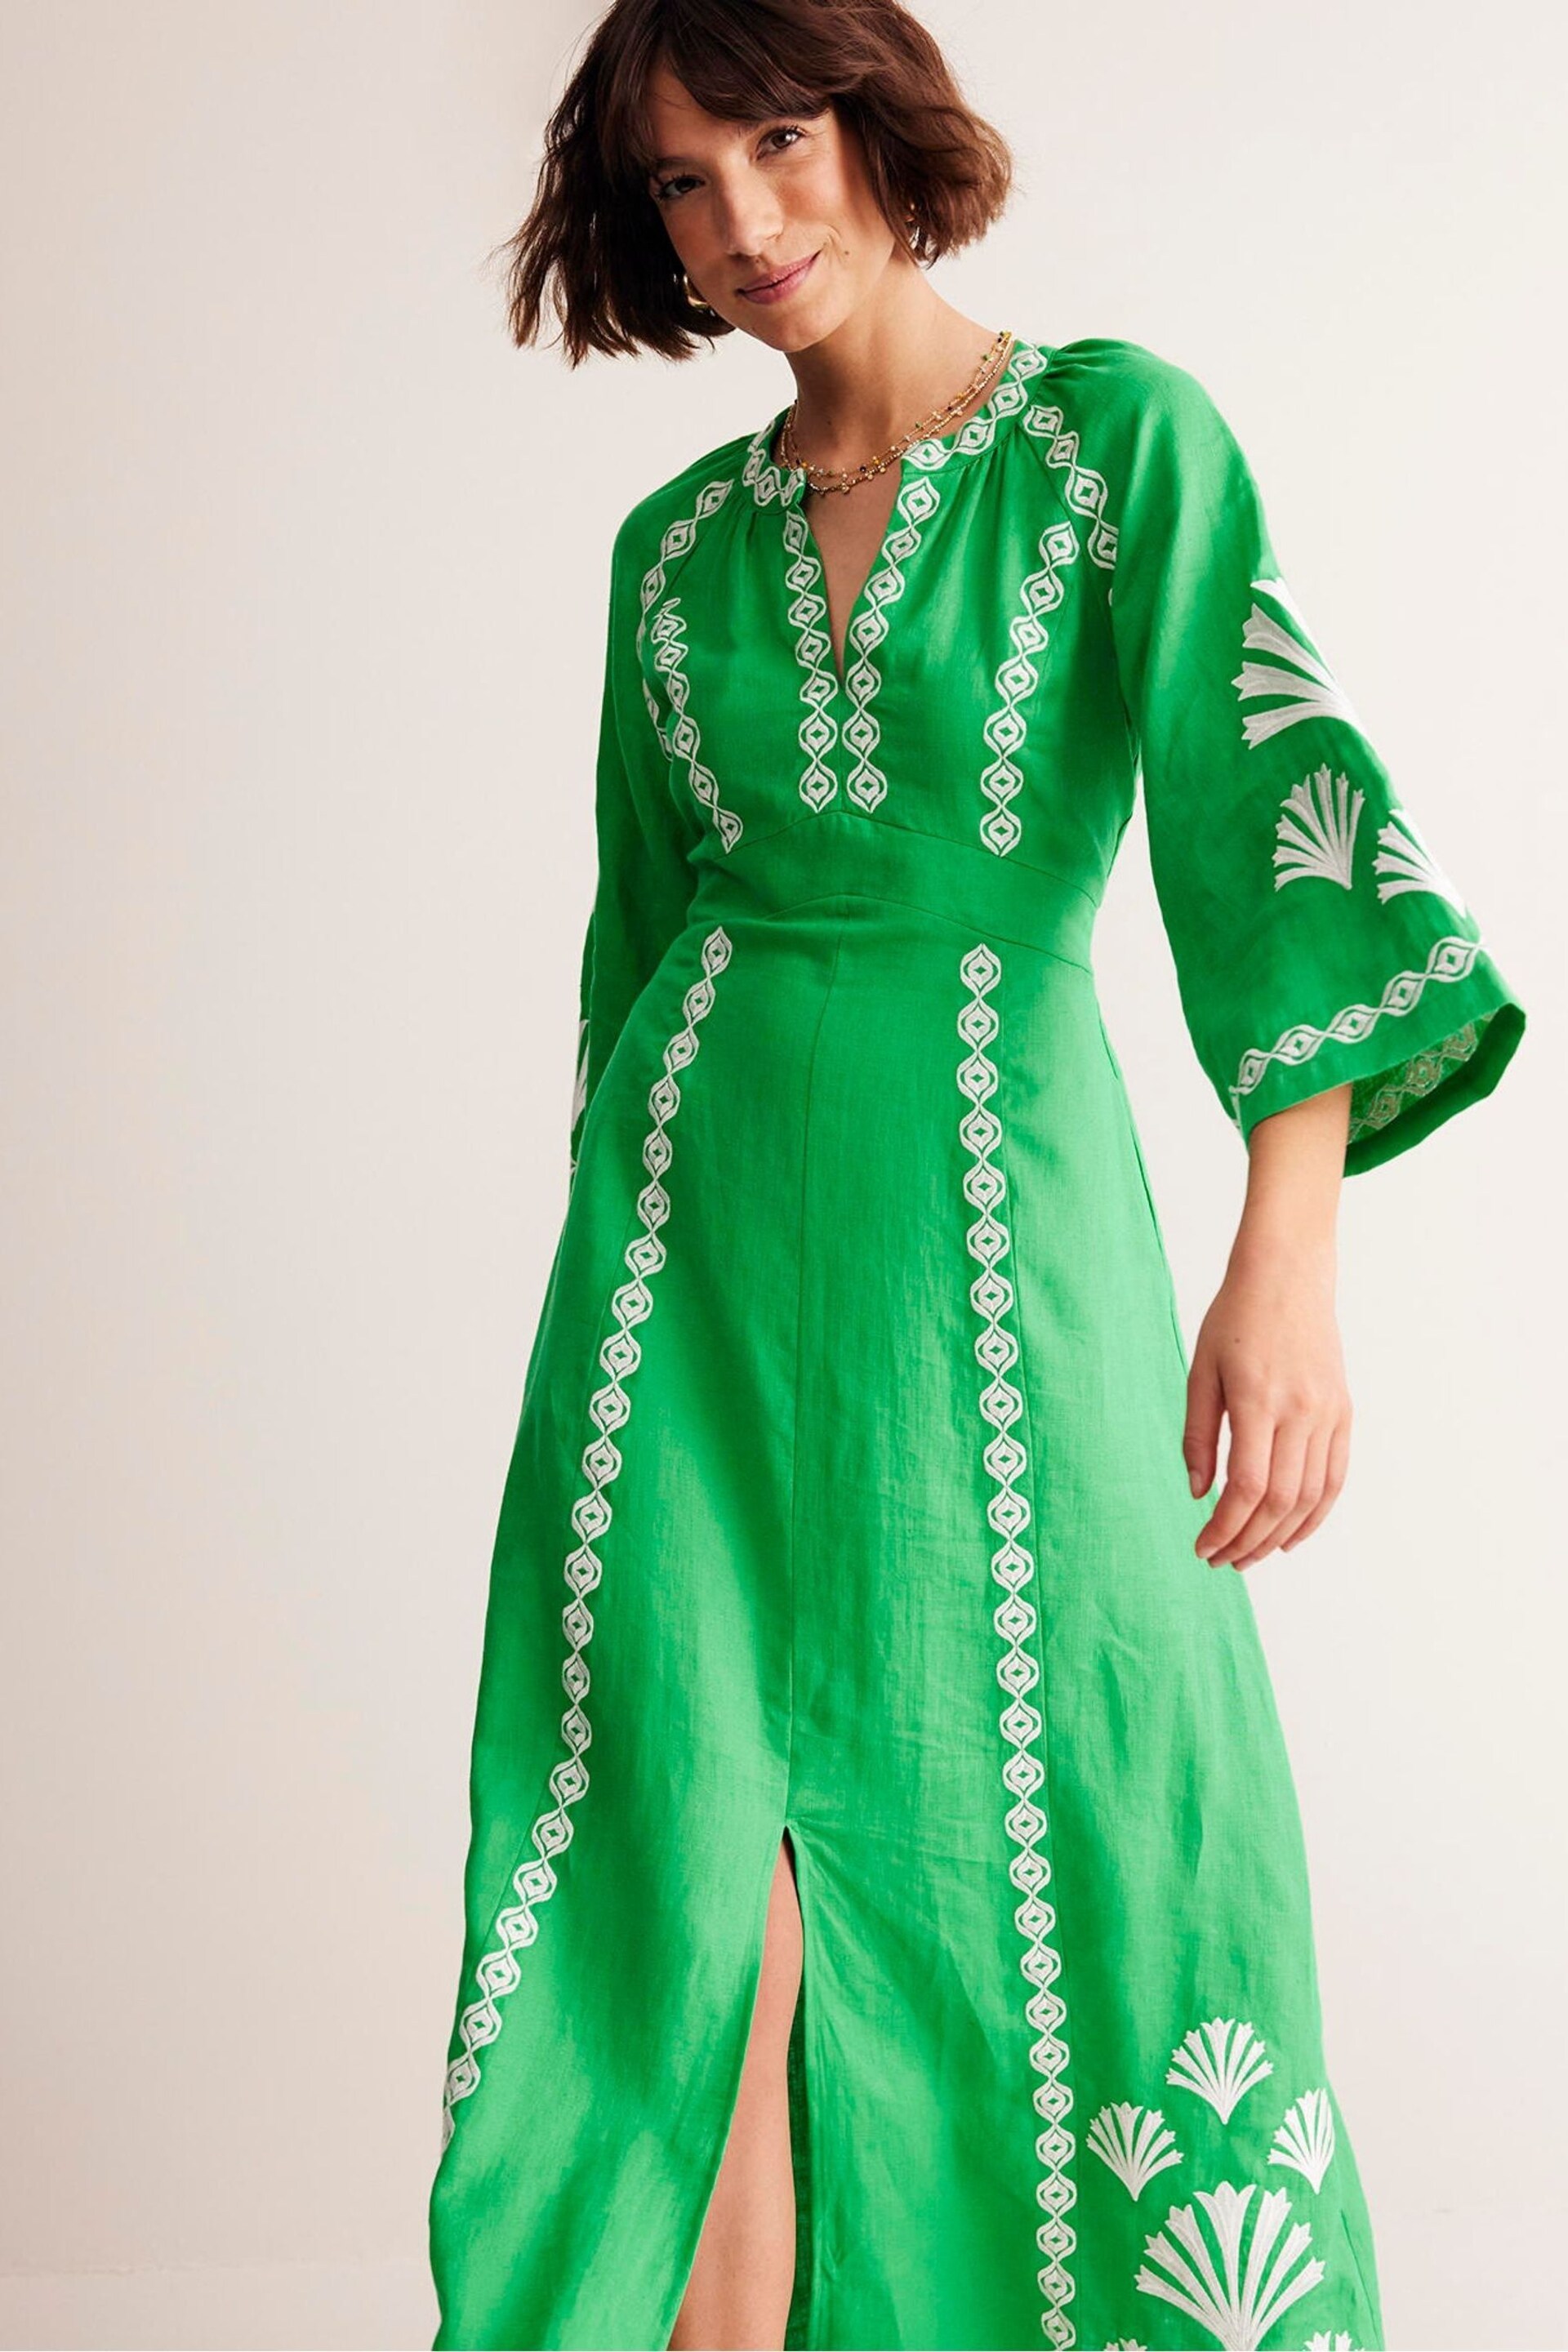 Boden Green Una Linen Embroidered Dress - Image 2 of 5